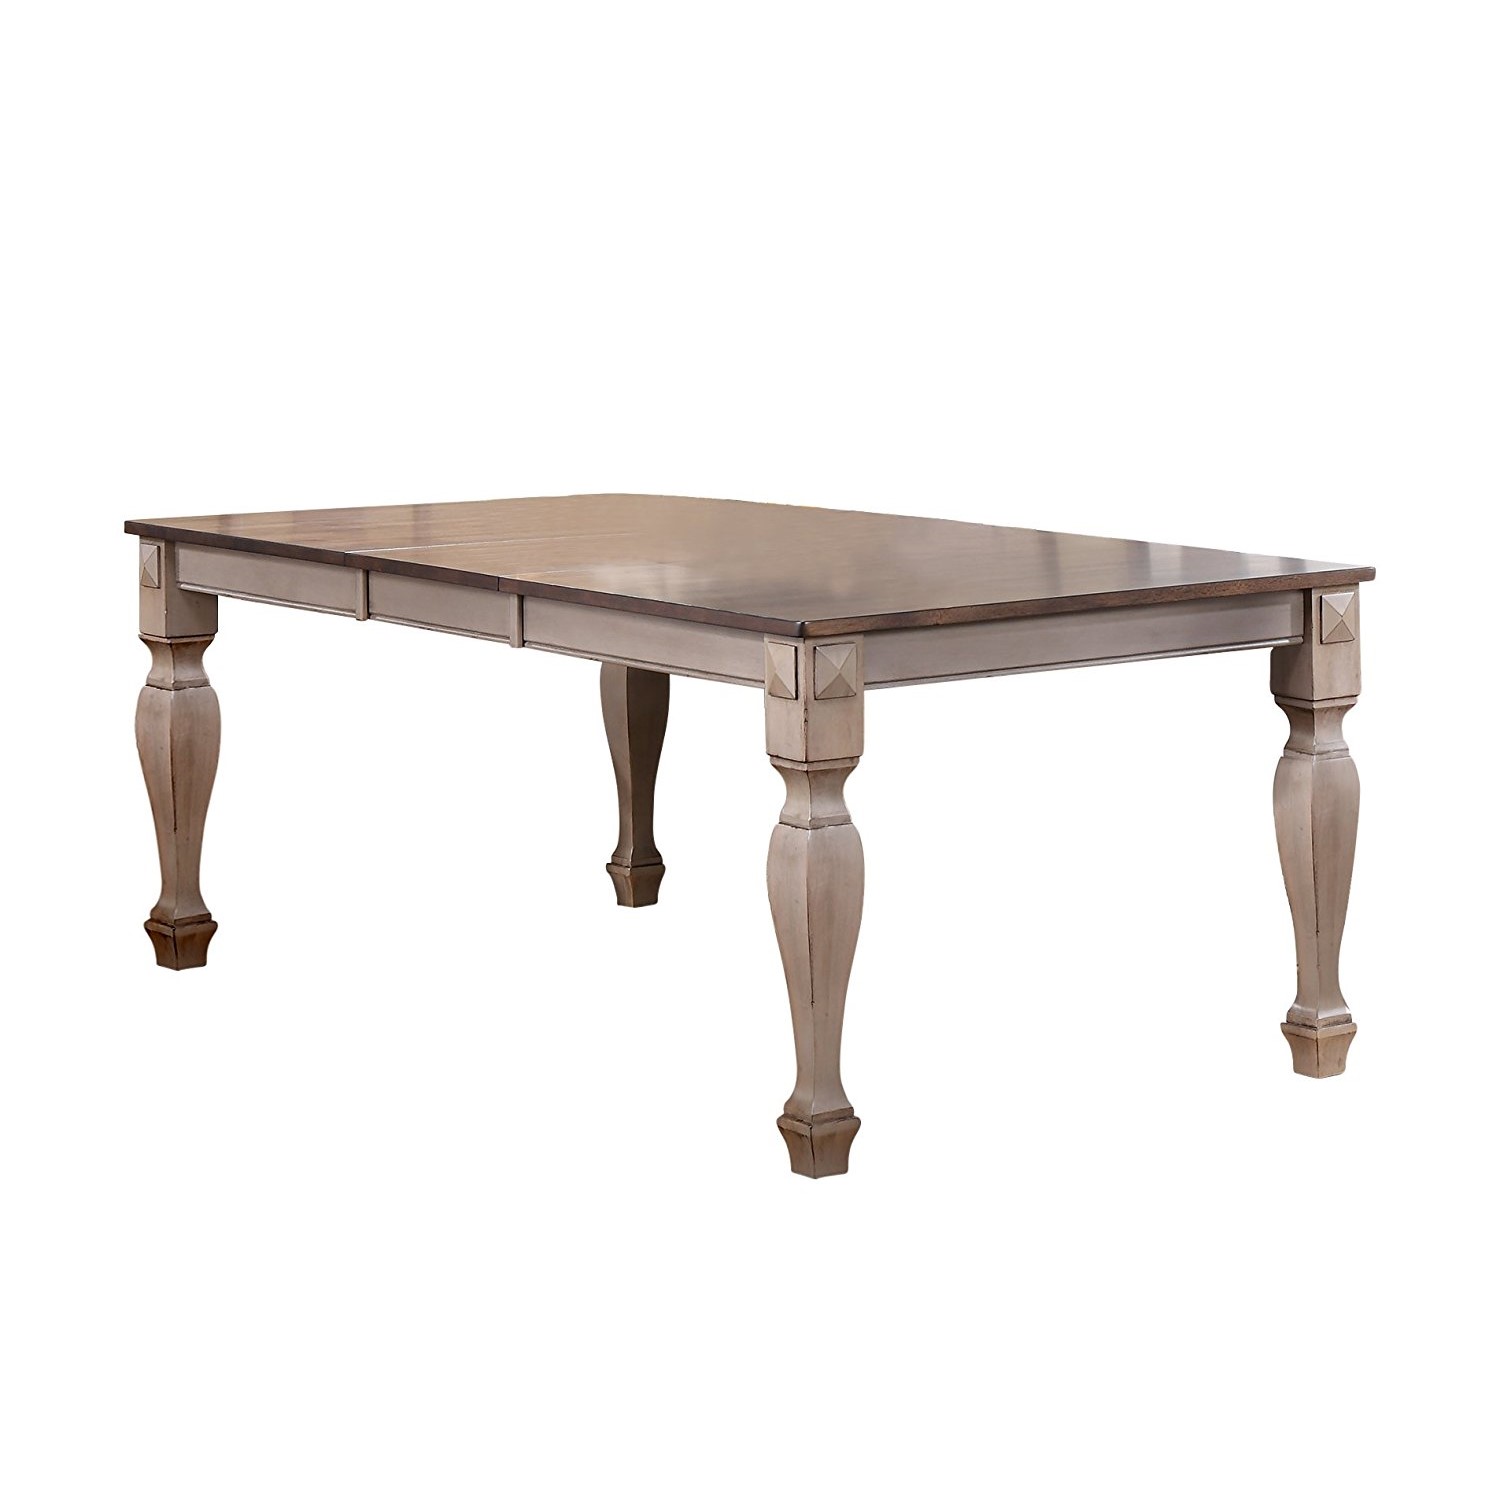 Charisma Wood Dining Table